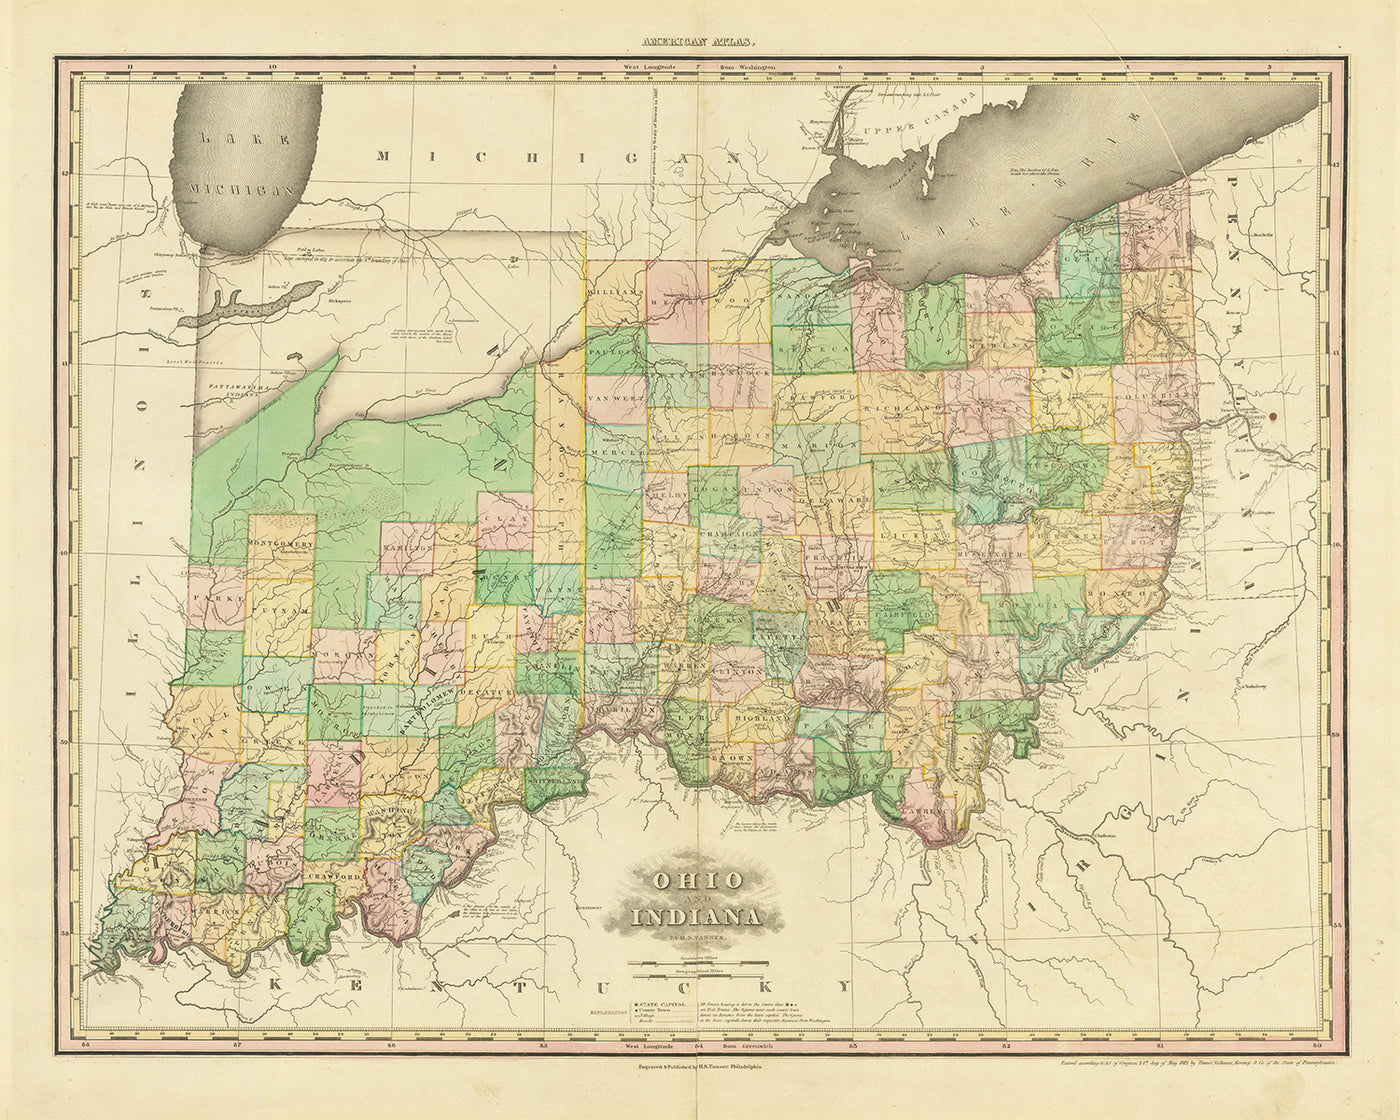 Old map of Ohio and Indiana by H.S. Tanner, 1820: Cincinnati, Columbus, Indianapolis, Cleveland, and Dayton